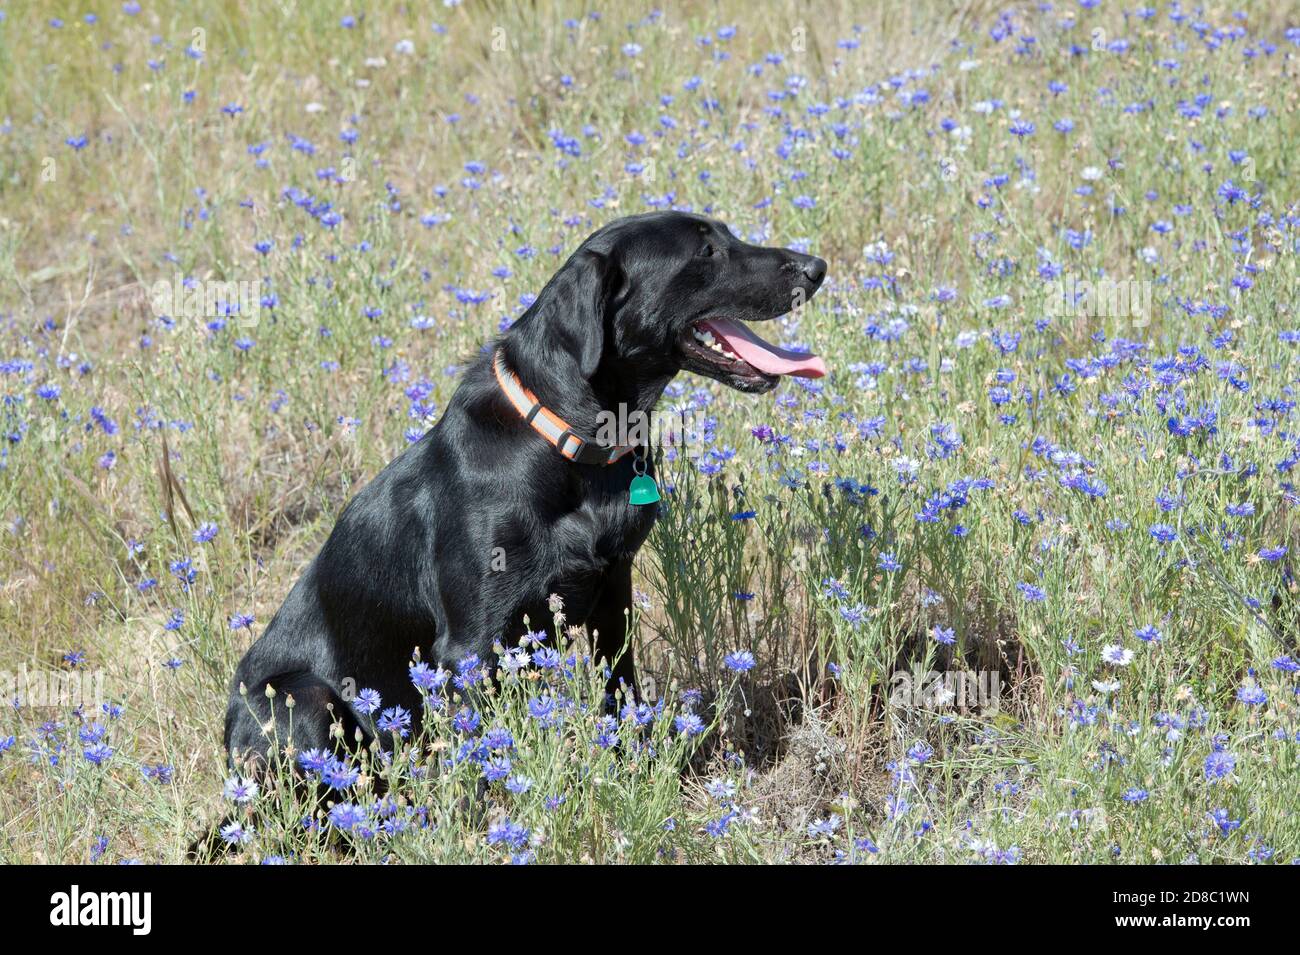 Black Labrador retriever sitting in a field of bachelor buttons Stock Photo